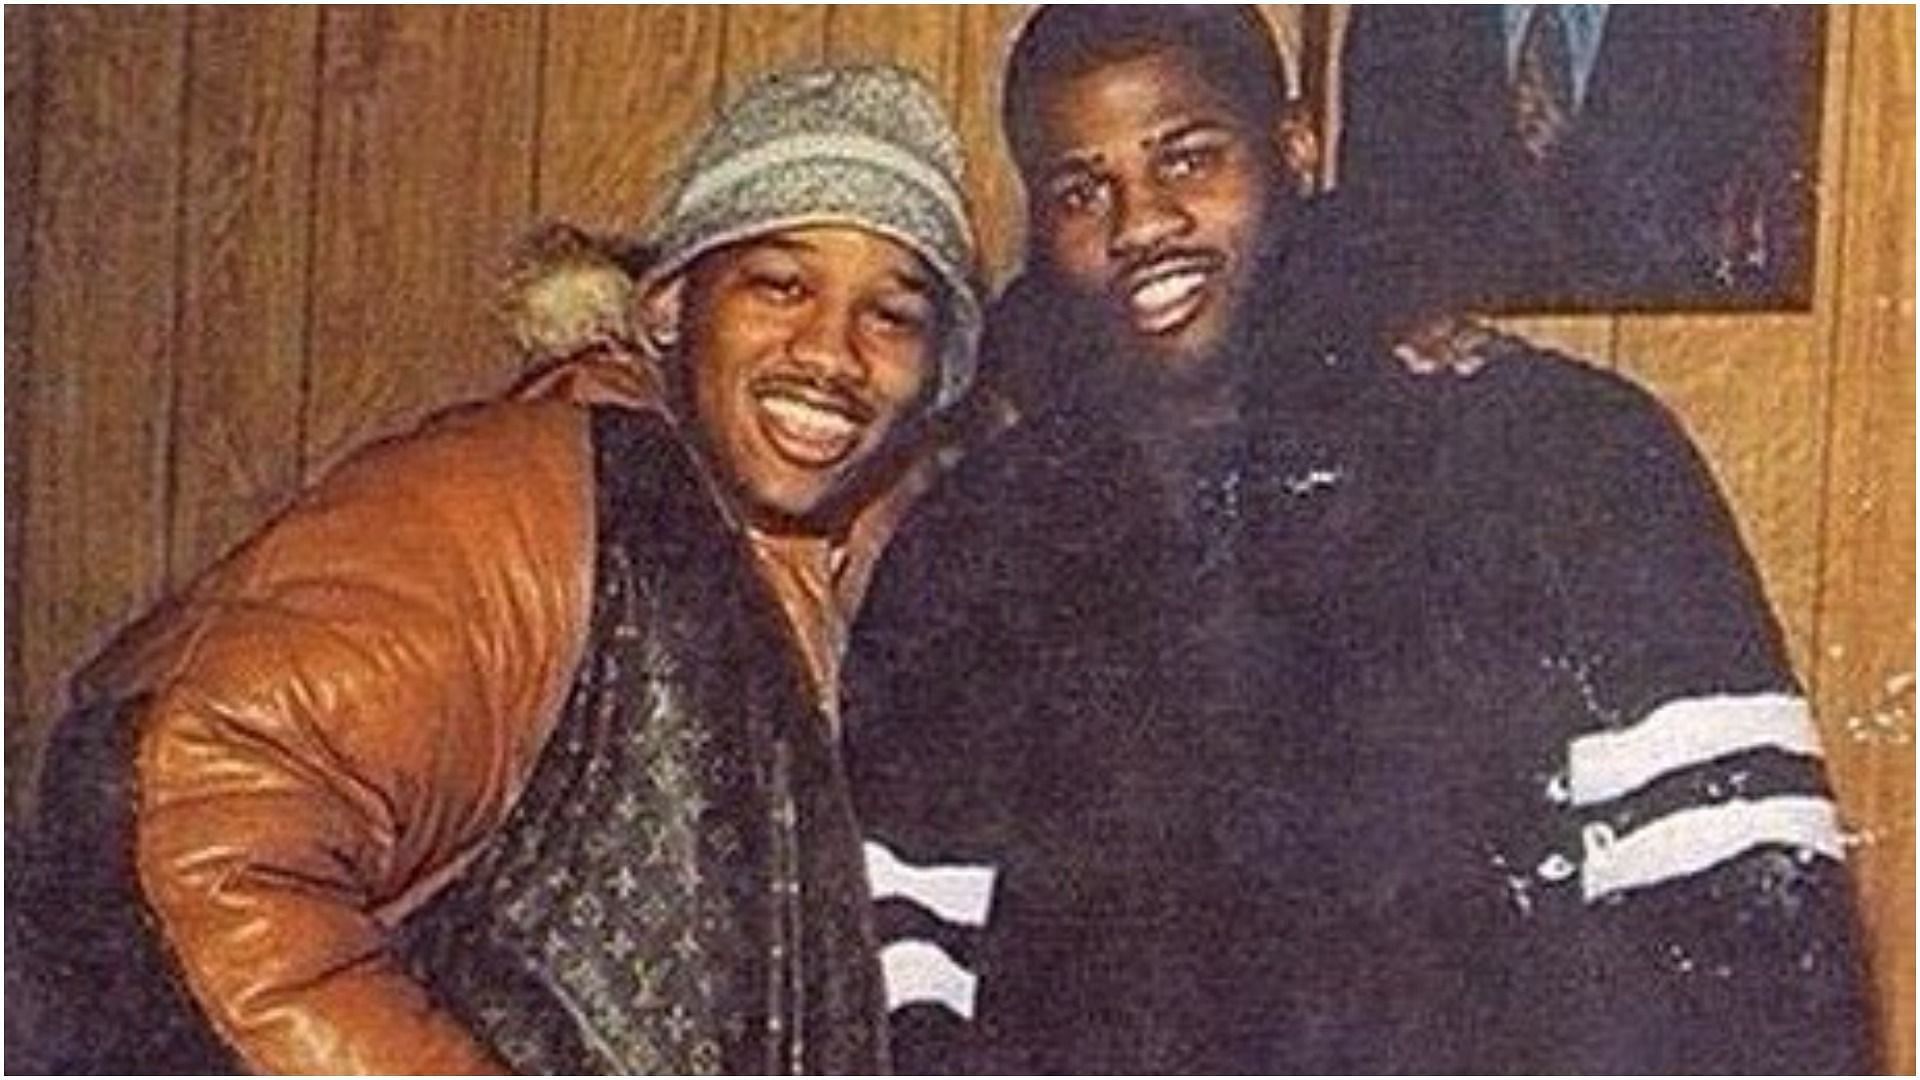 Most Think Alpo Martinez was Killed Over Old School Beefs